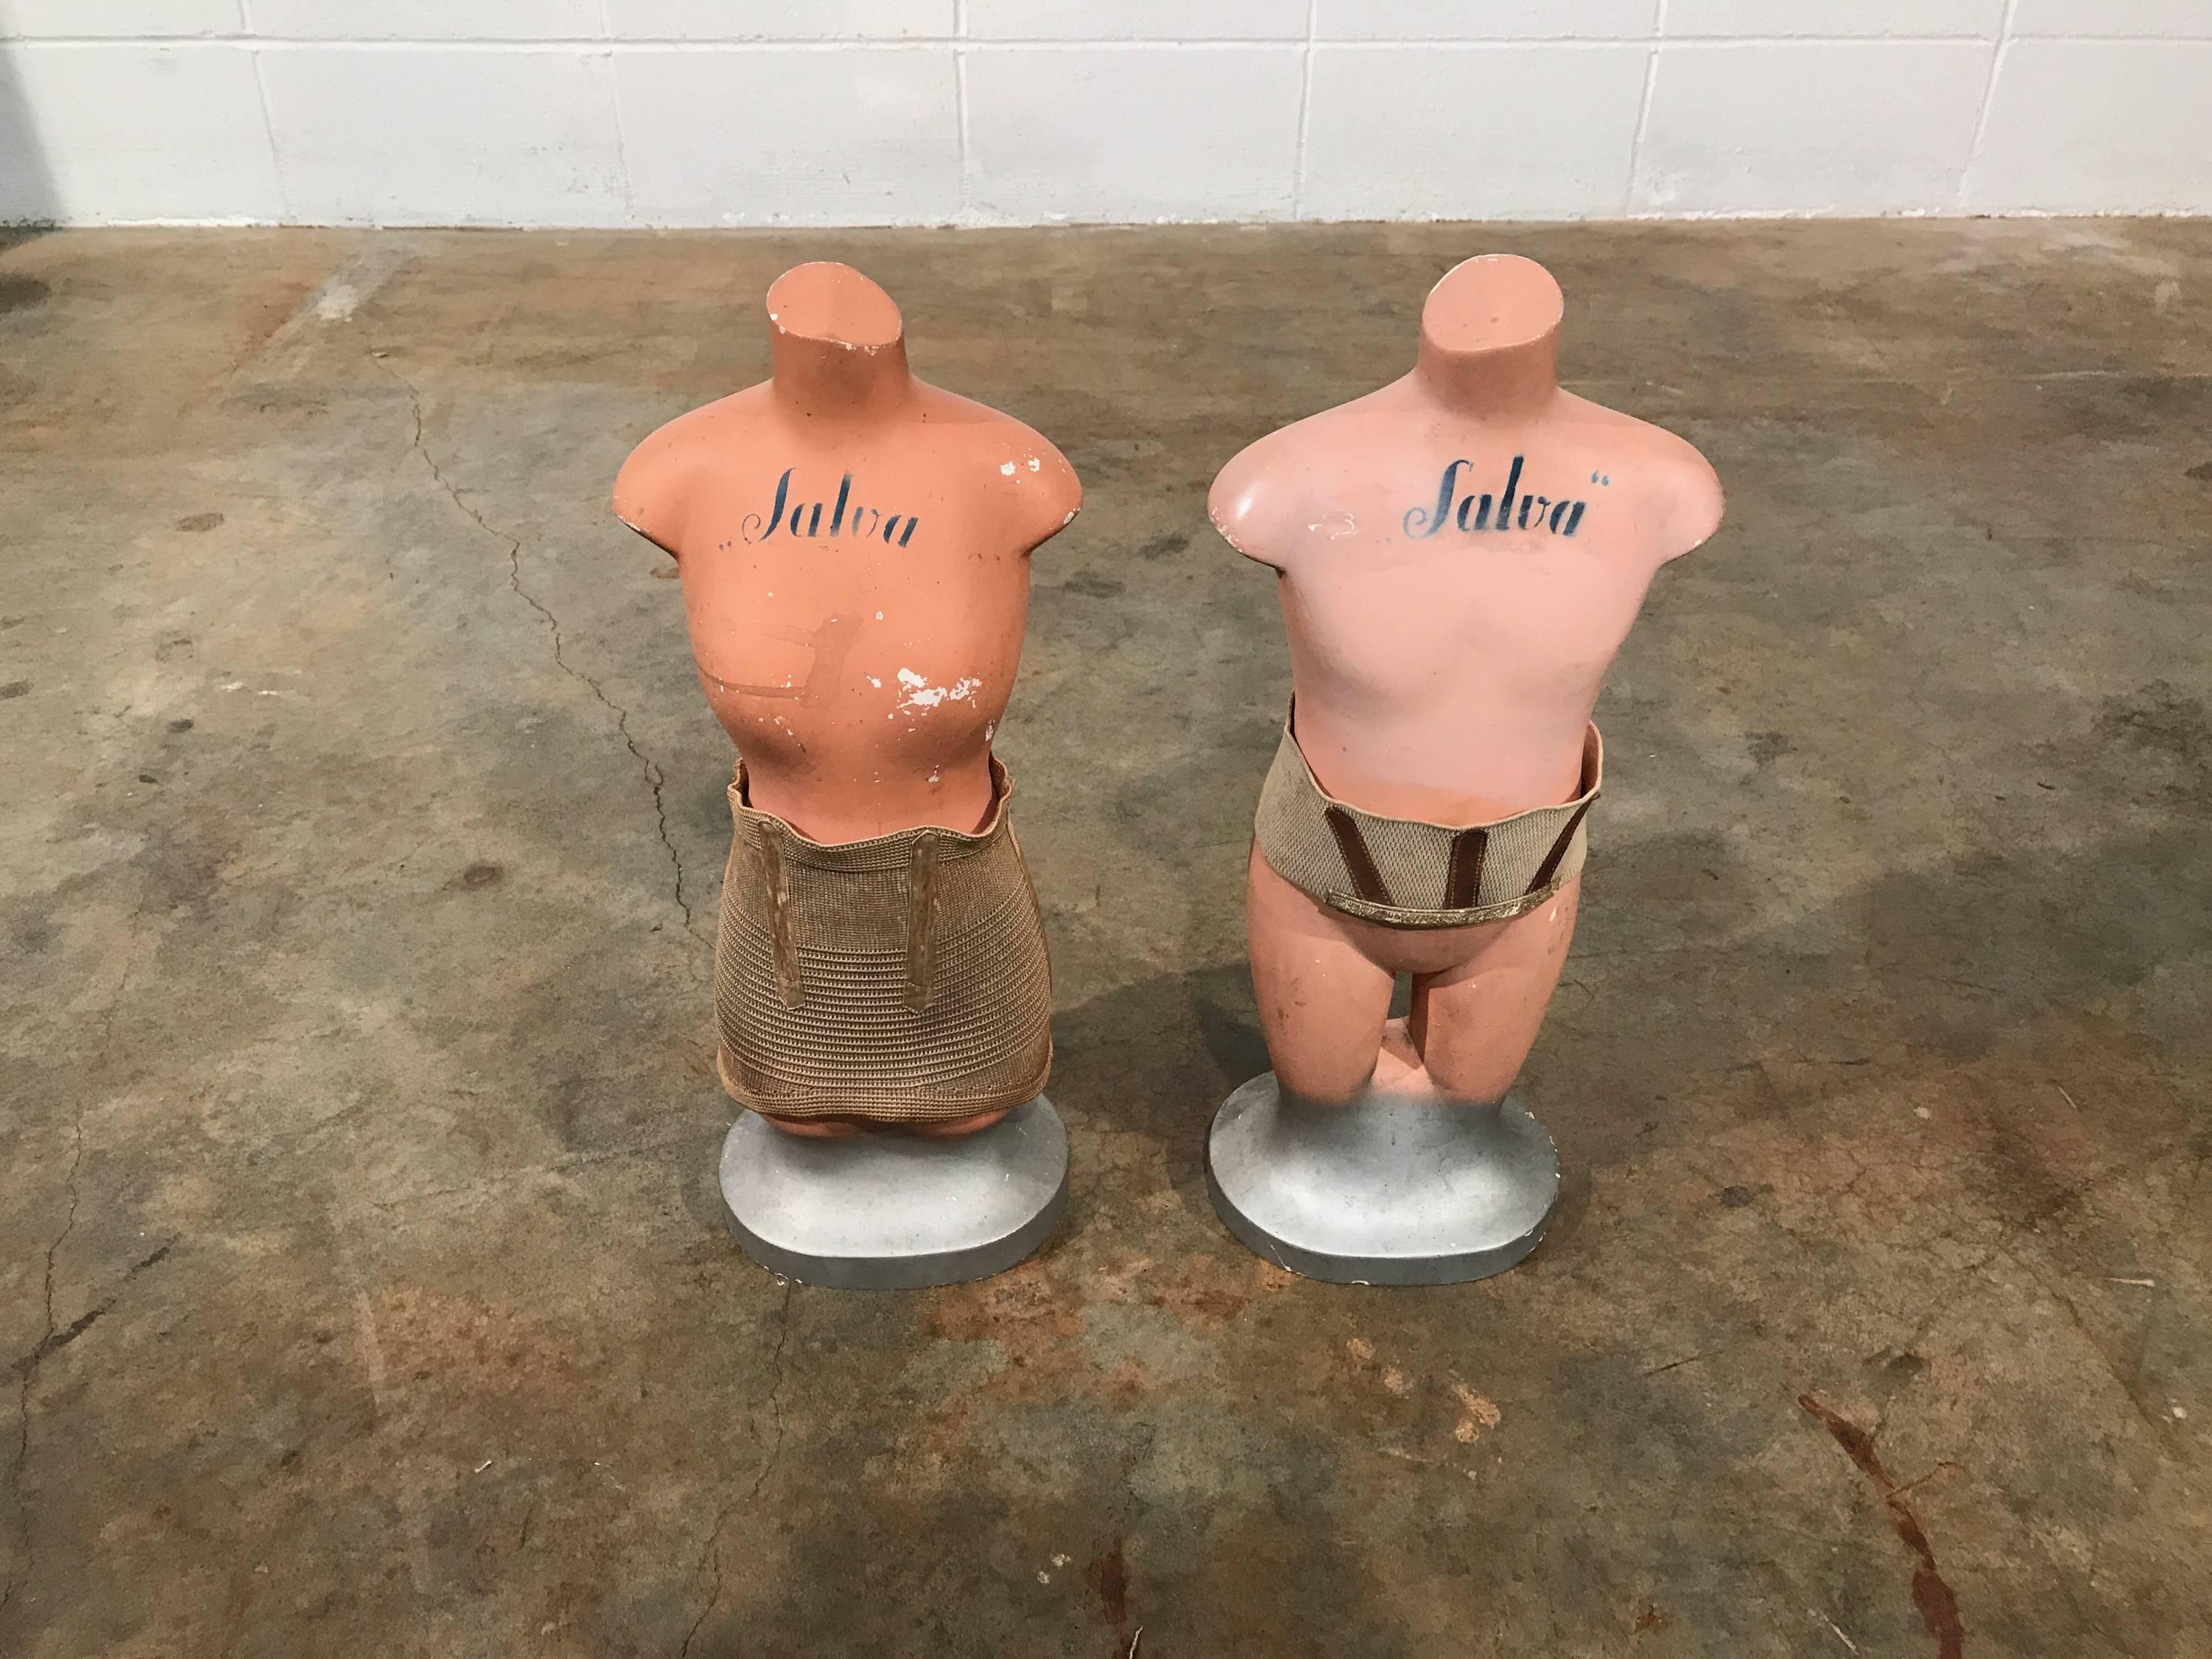 Rare pair of French salesman sample counter top Girdle Mannequins, Girard, Paris
If you are looking for unique and love quirky décor pieces then these will be perfect.
Girdles can be removed if desired. Believed to be made of ceramic.
They do